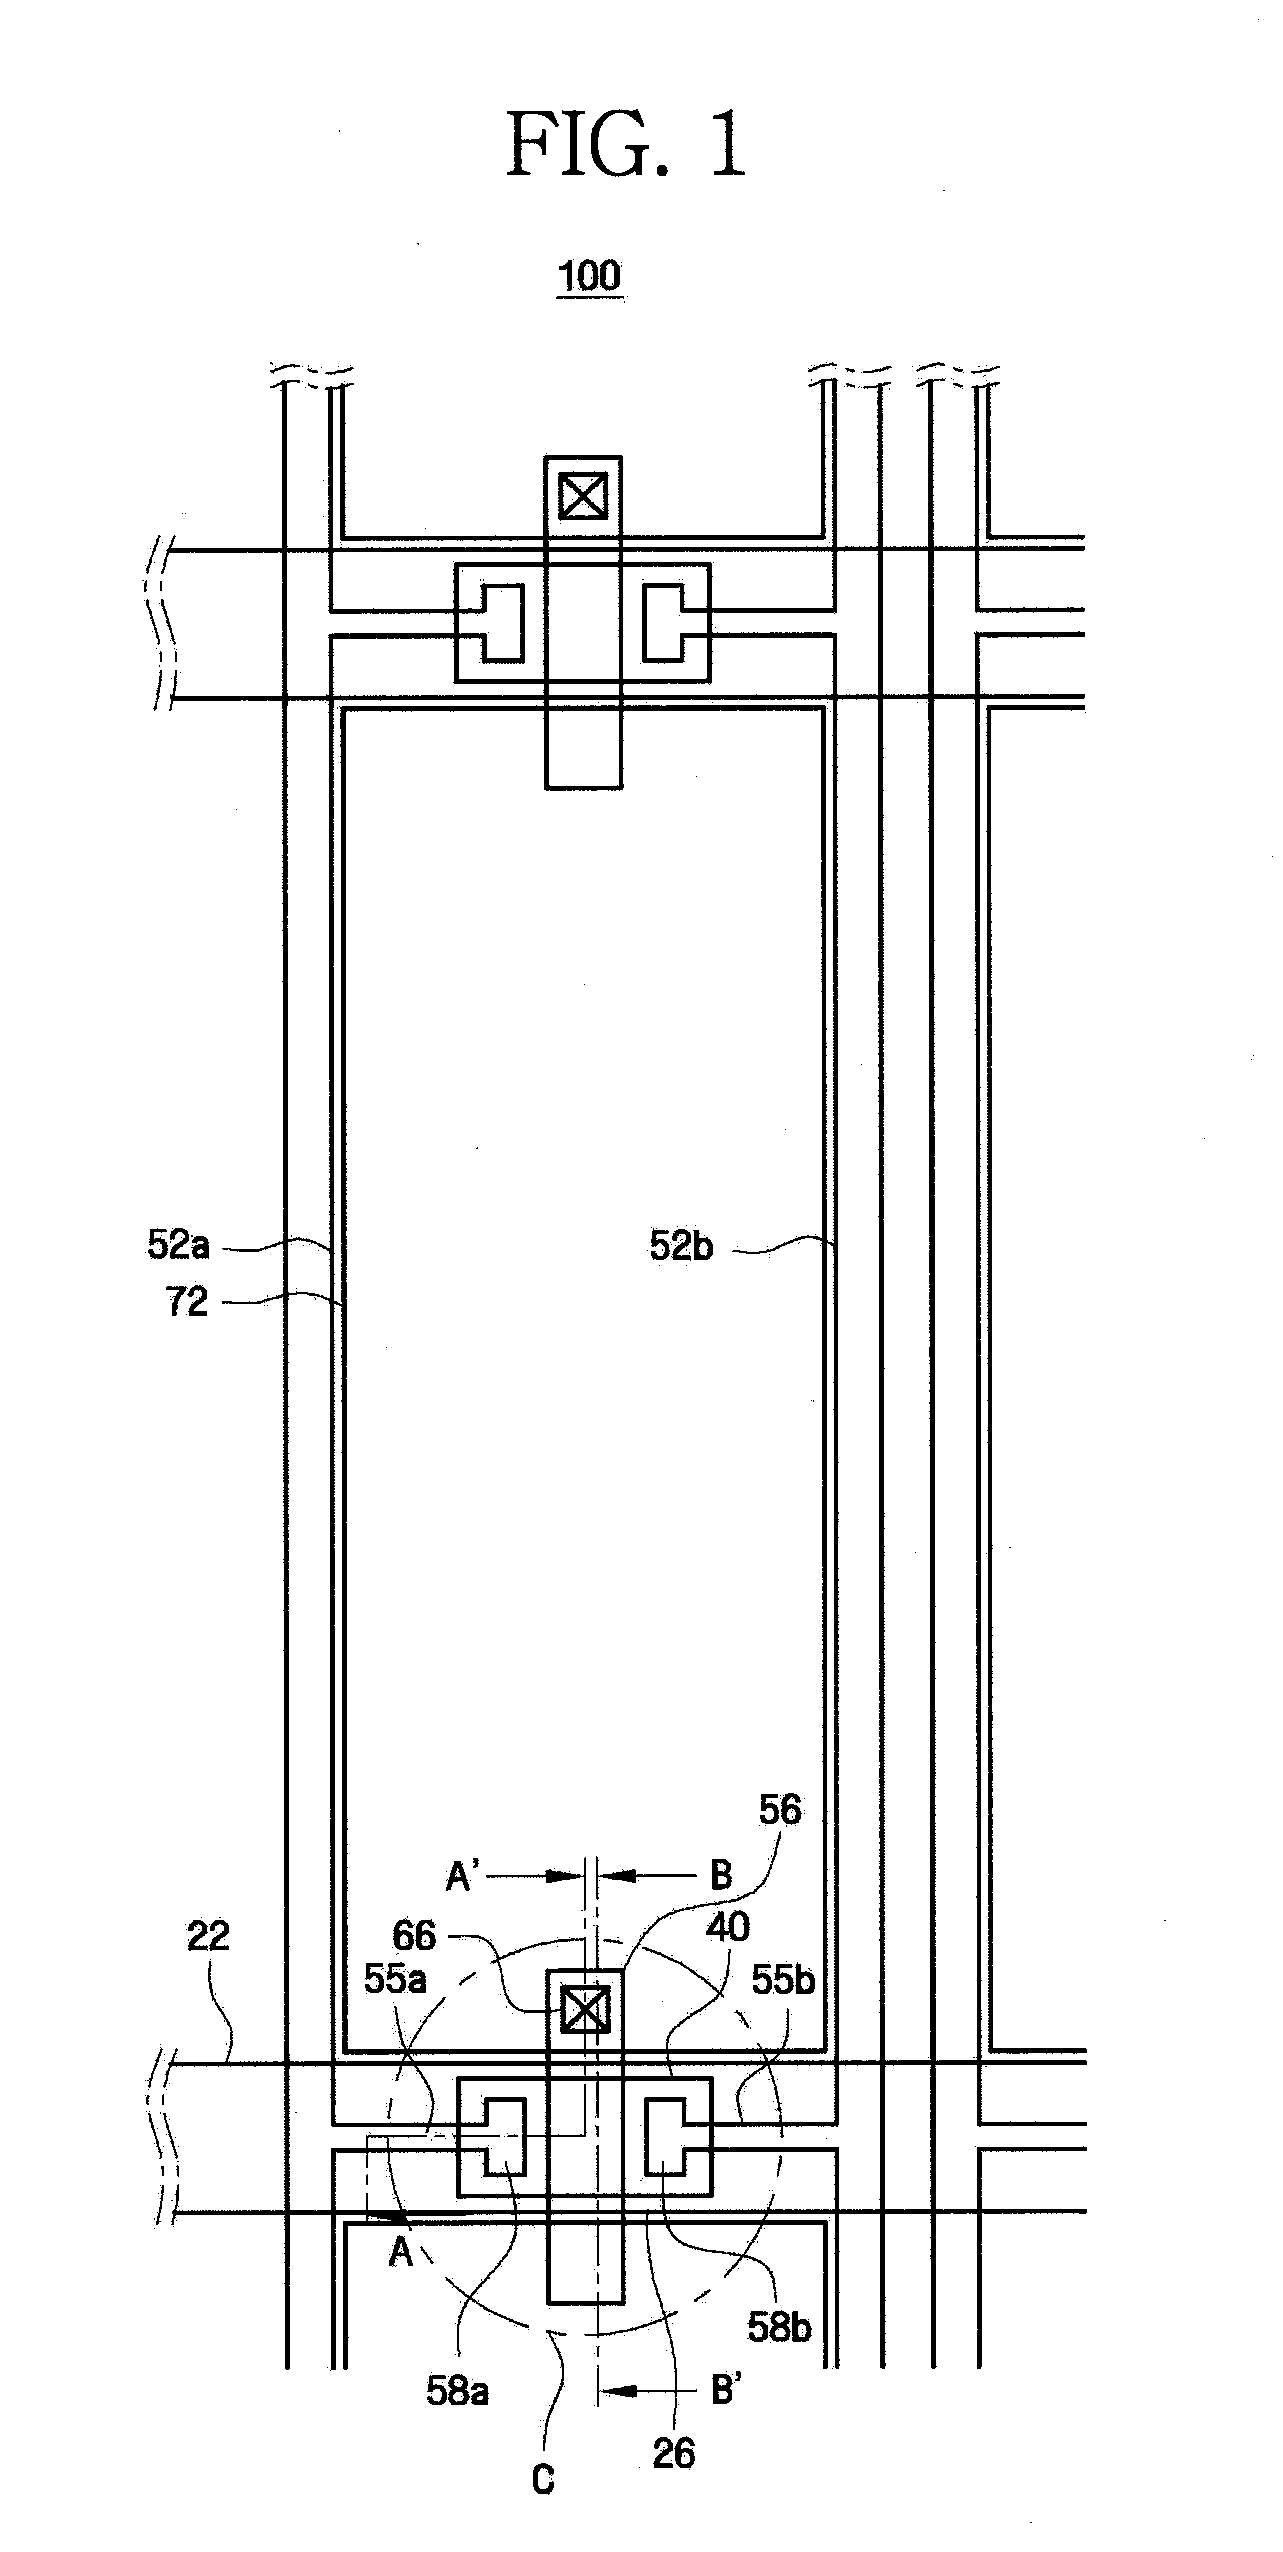 Thin film transistor substrate having structure for compensating for mask misalignment